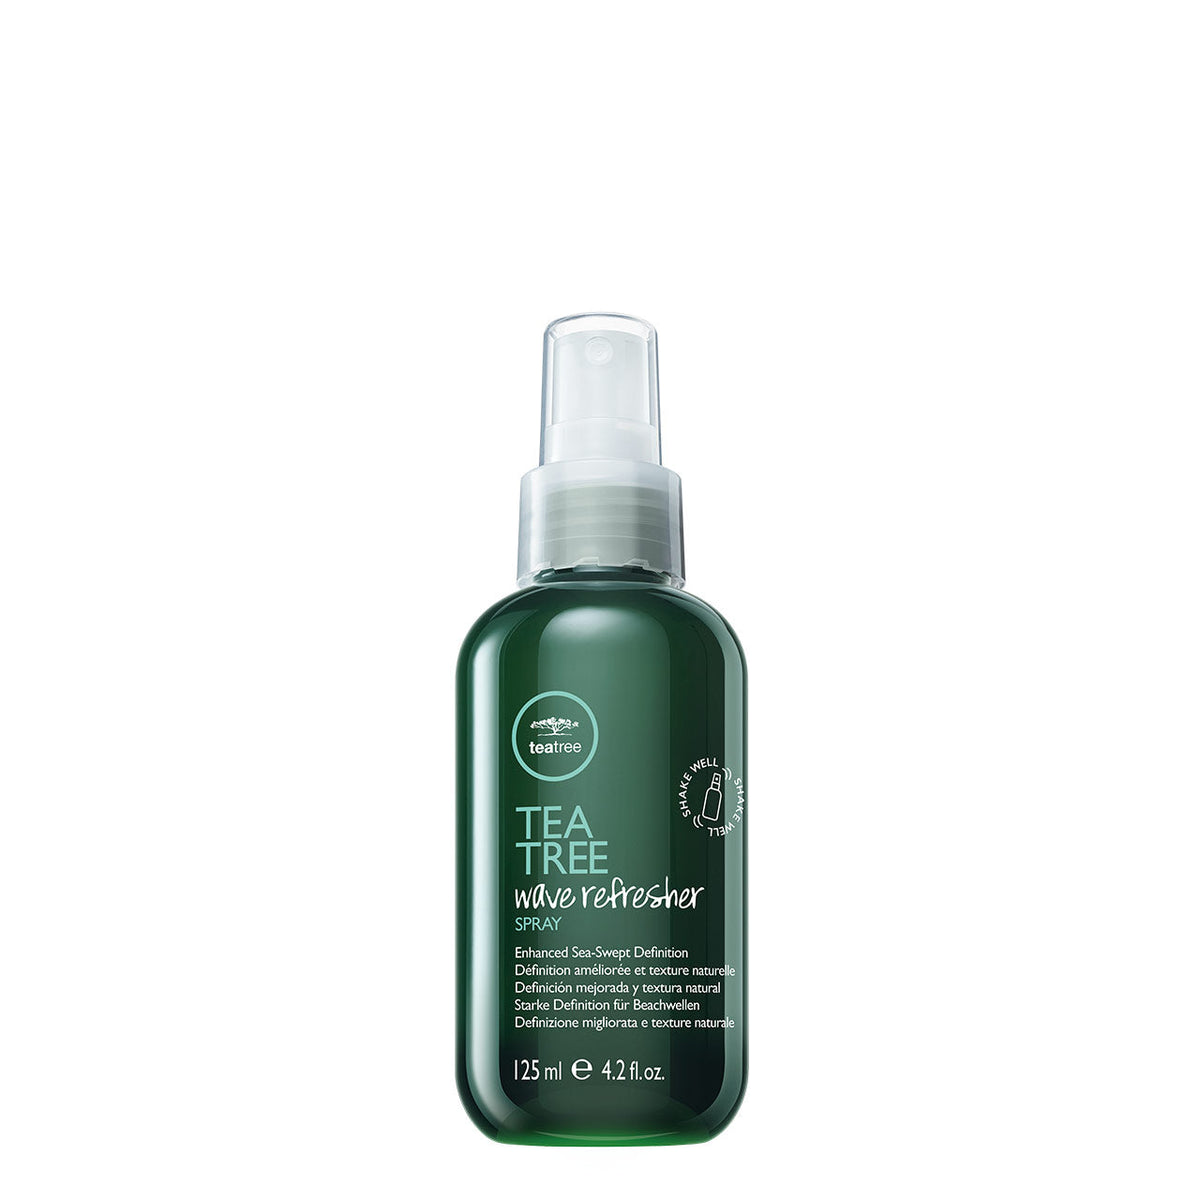 Tea Tree Special Wave Refresher Spray - 125ML - by Paul Mitchell |ProCare Outlet|